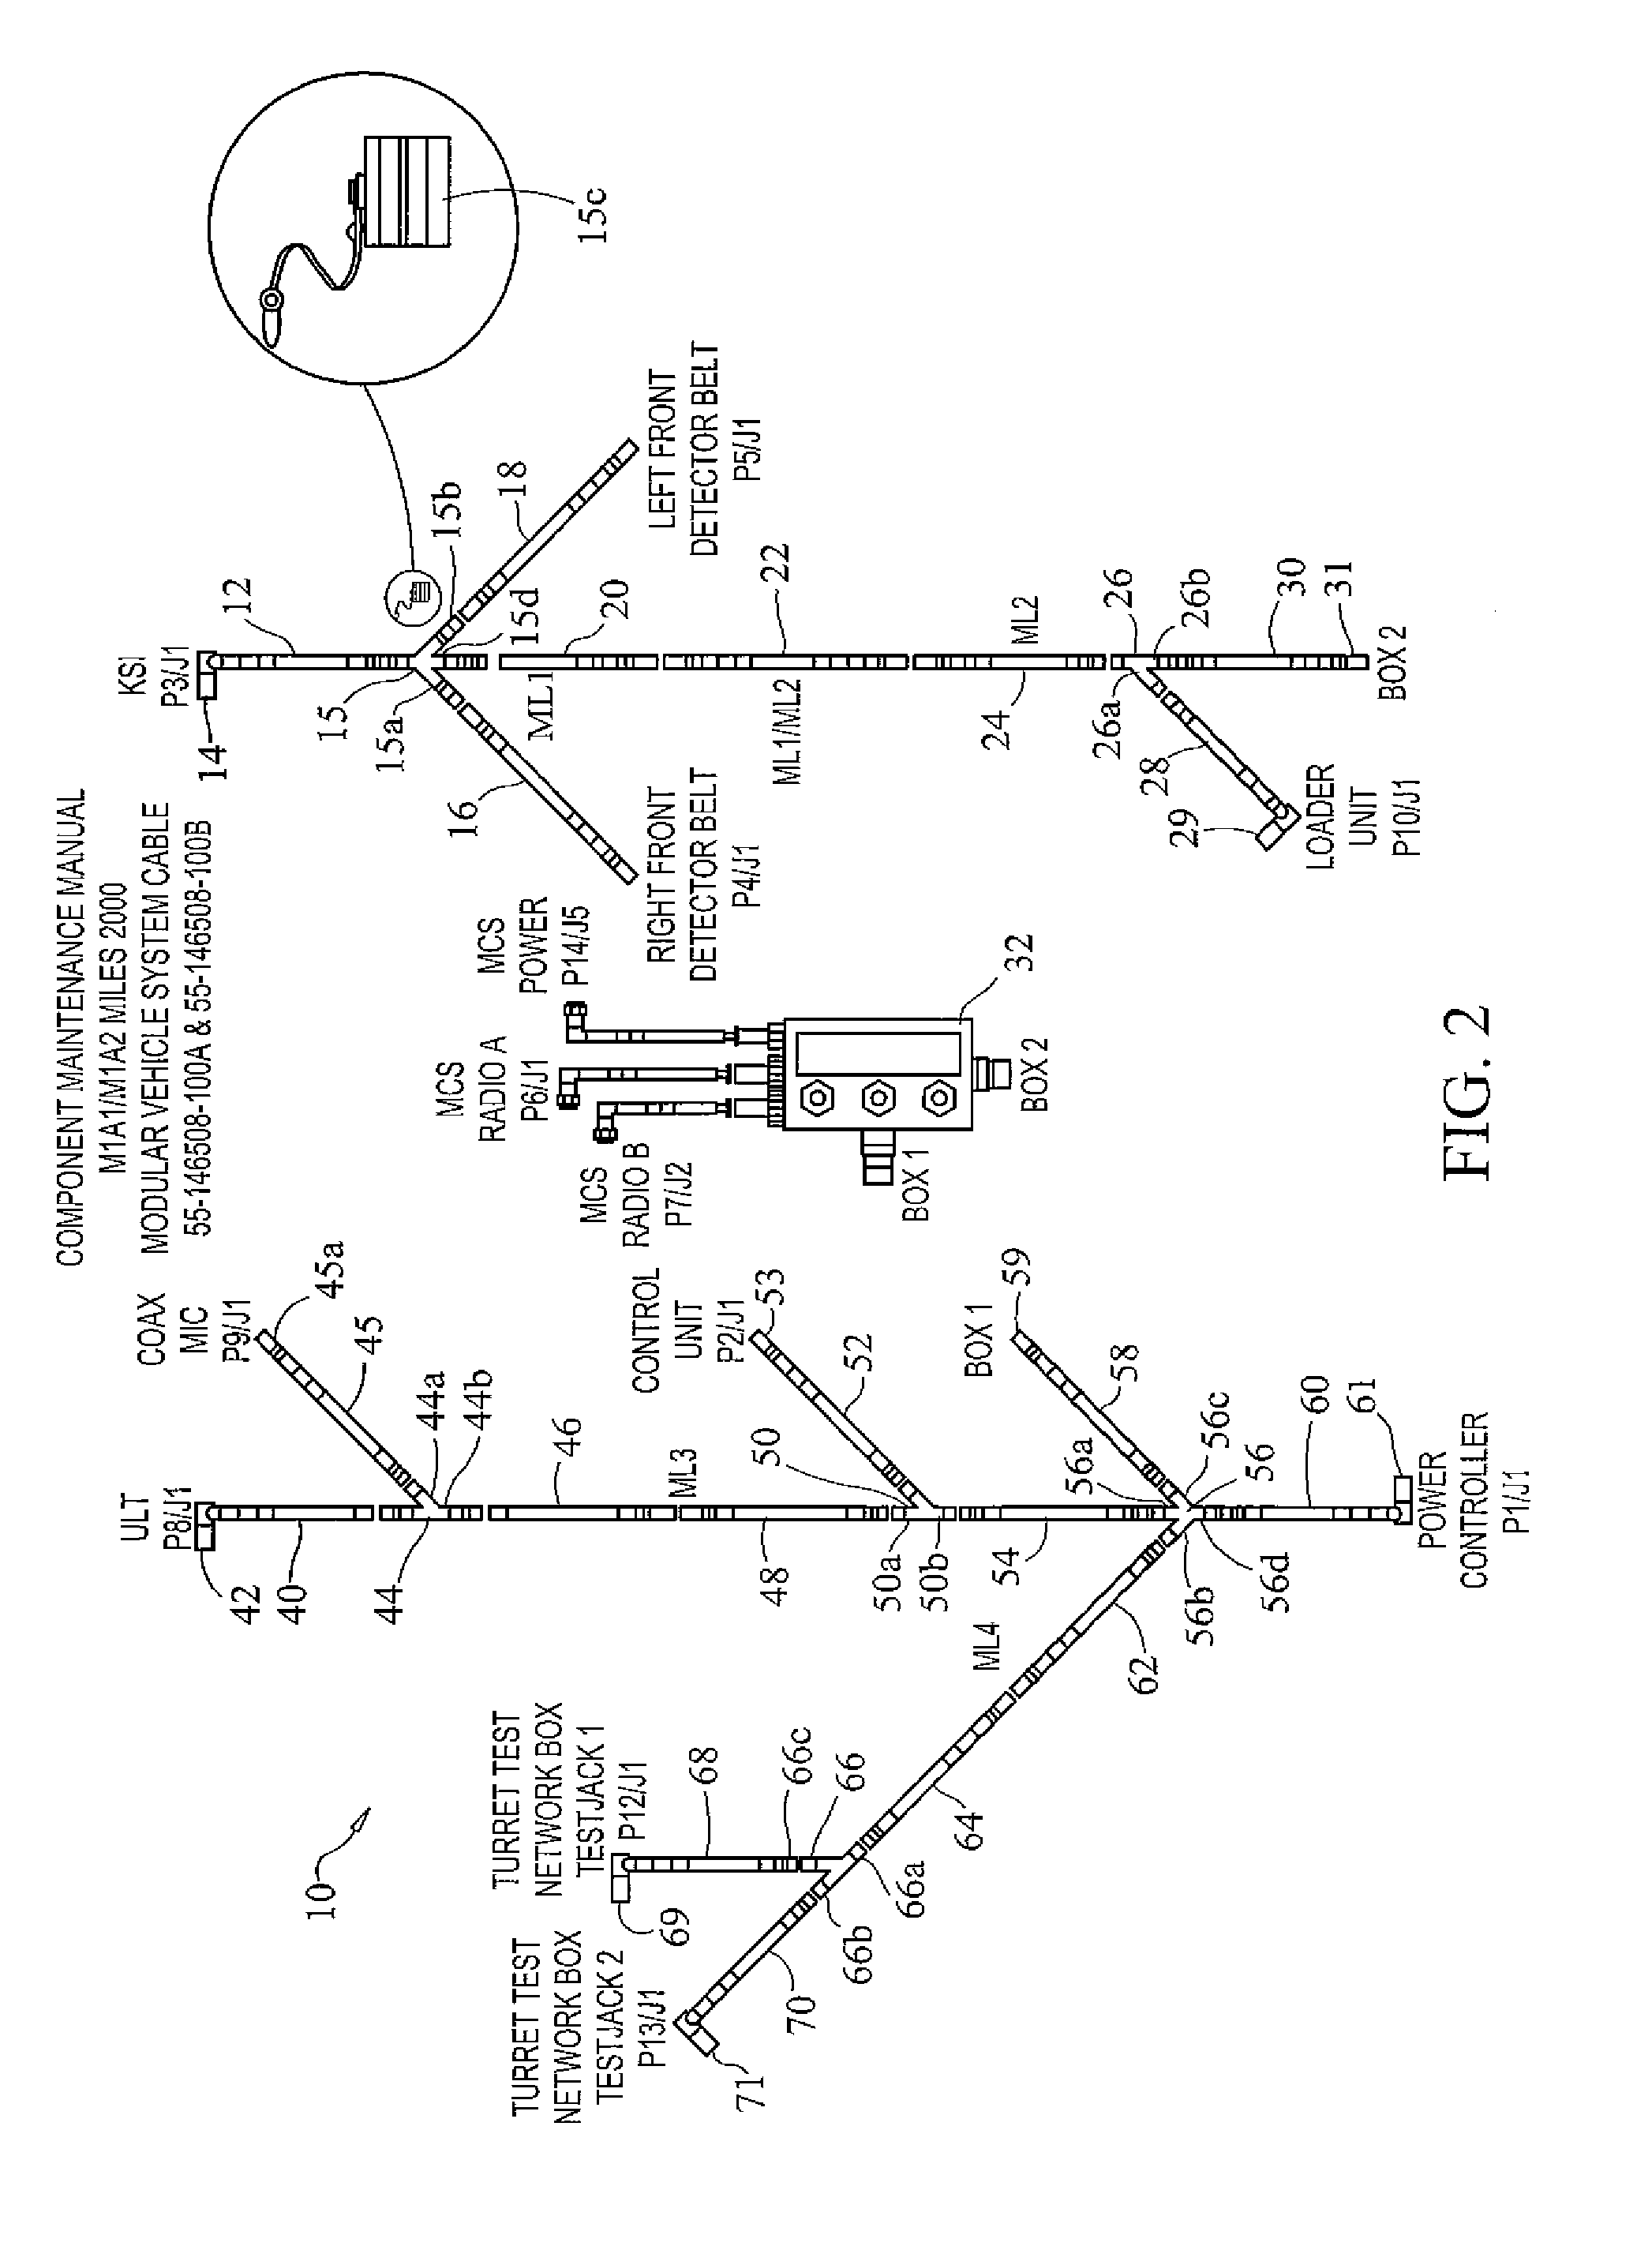 Modular electrical harness for military vehicles adapted with the multiple integrated laser engagement system